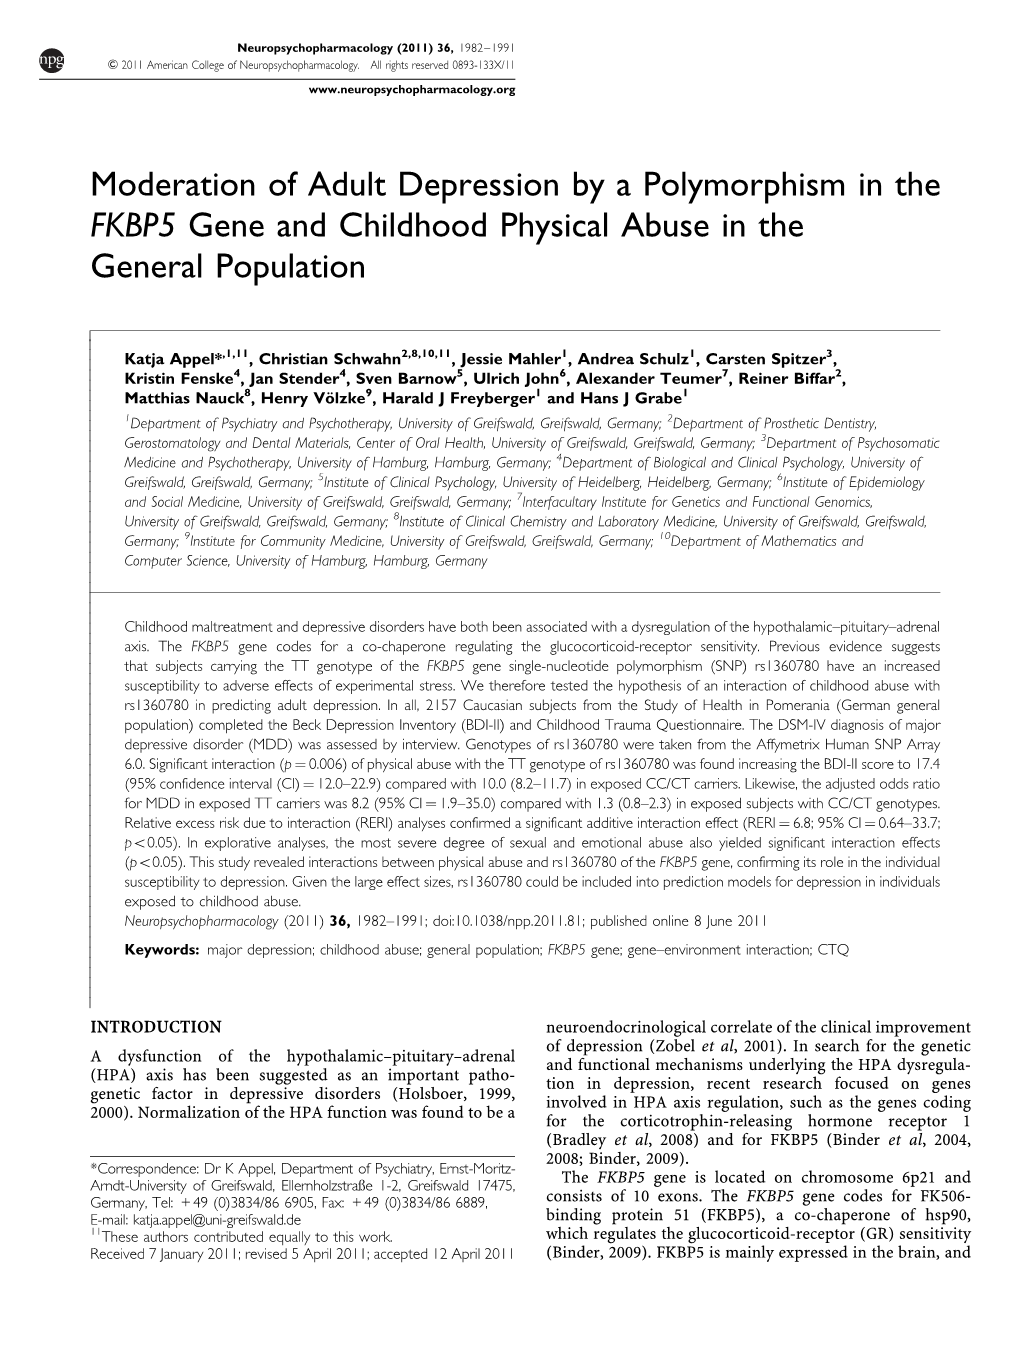 Moderation of Adult Depression by a Polymorphism in the FKBP5 Gene and Childhood Physical Abuse in the General Population